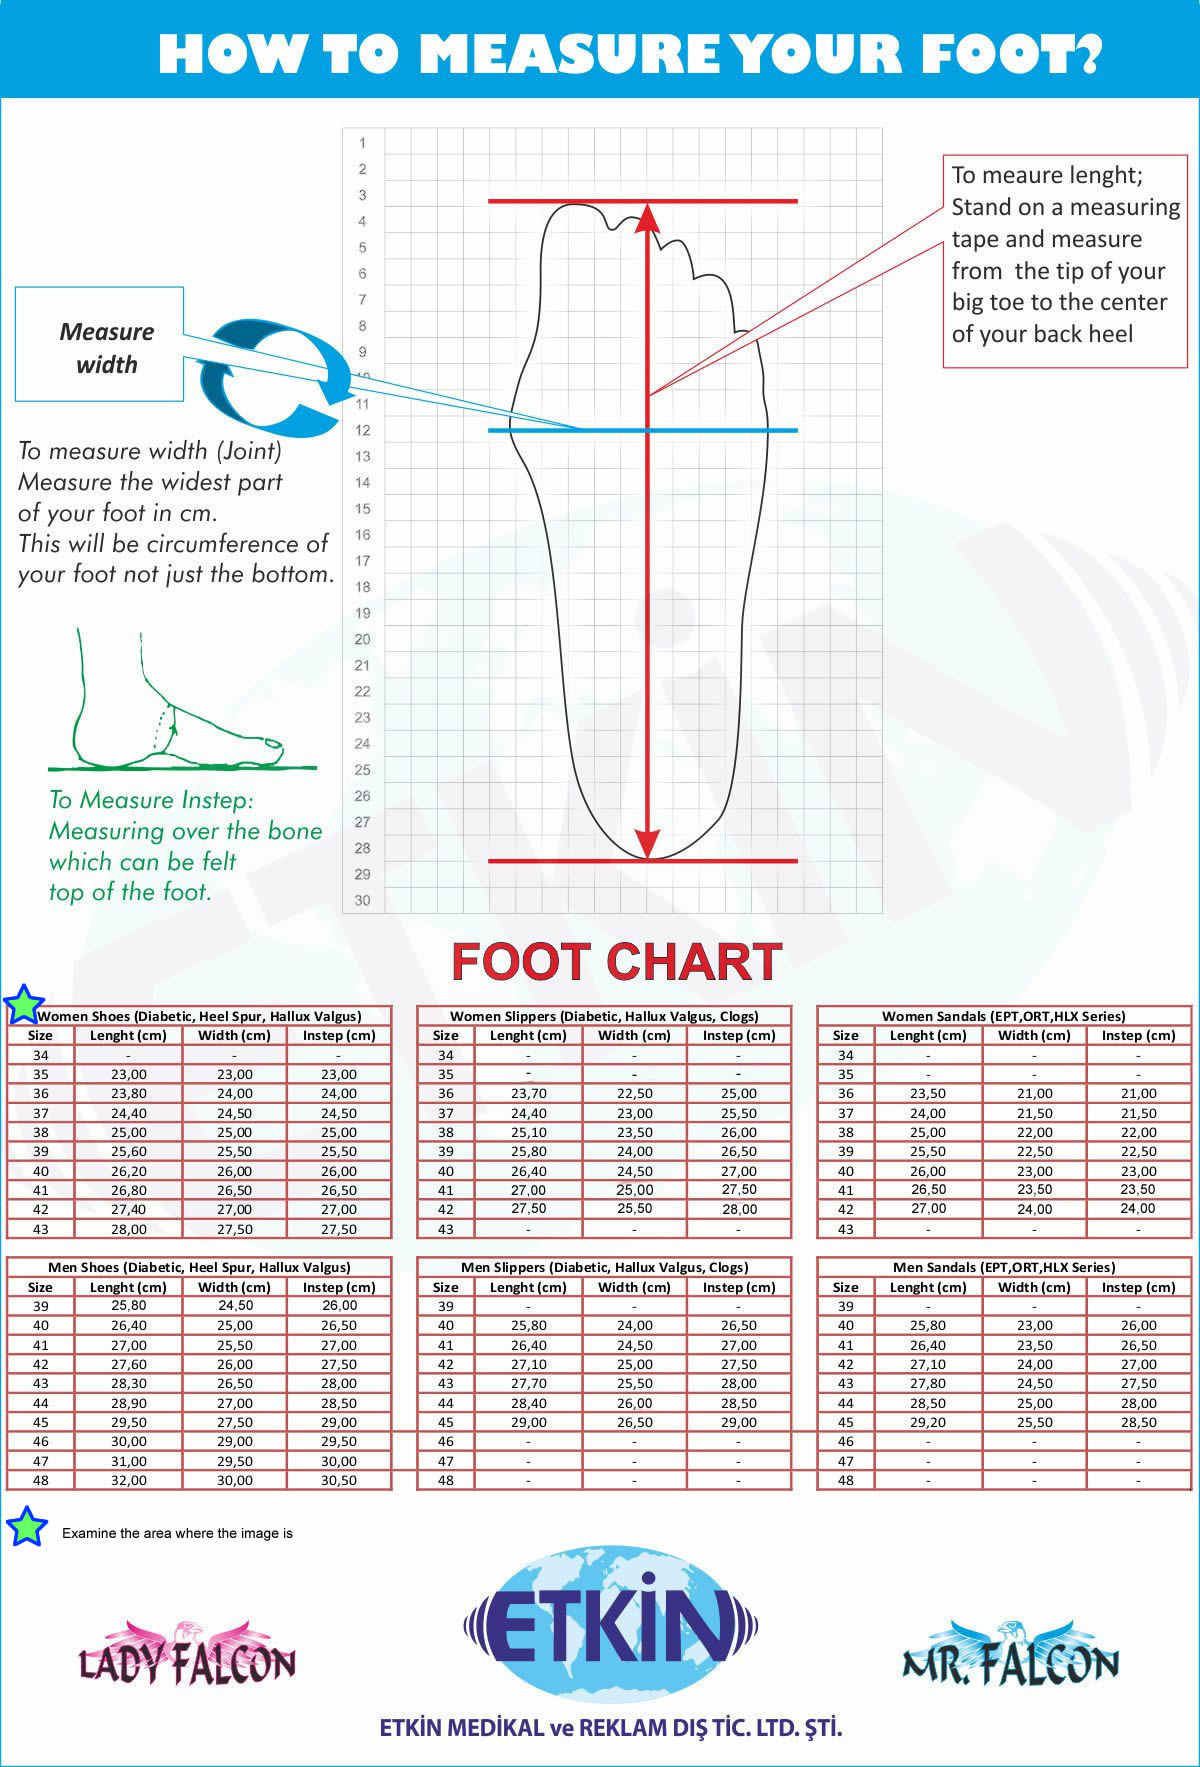 Women shoes for heel pains size chart